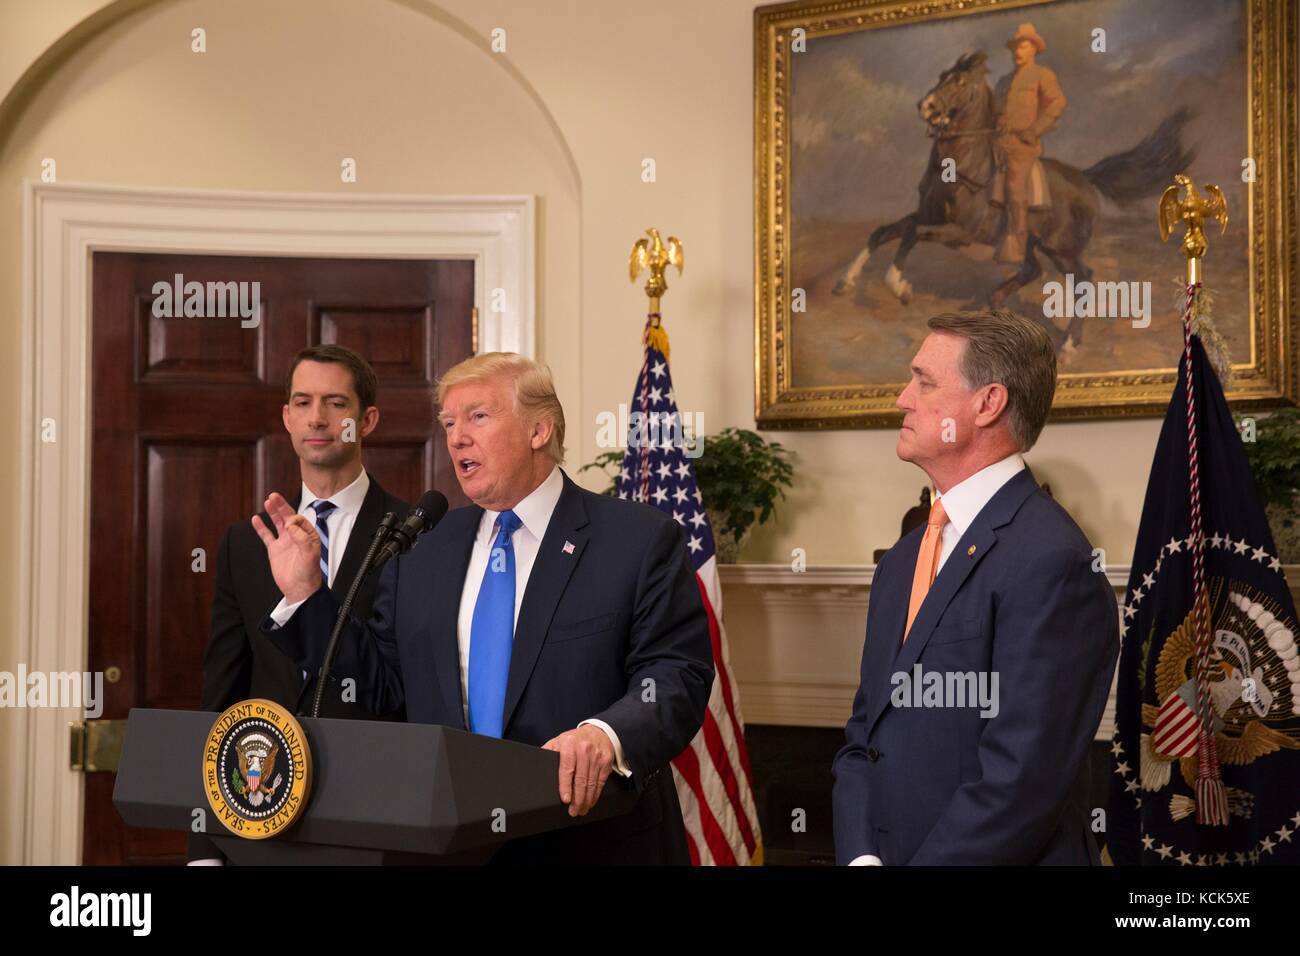 U.S. President Donald Trump, Arkansas Senator Tom Cotton (left) and Georgia Senator David Perdue hold a press conference on the RAISE Act, Green Card Reform, and illegal immigration at the White House Roosevelt Room August 2, 2017 in Washington, DC.  (photo by Andrea Hanks via Planetpix) Stock Photo